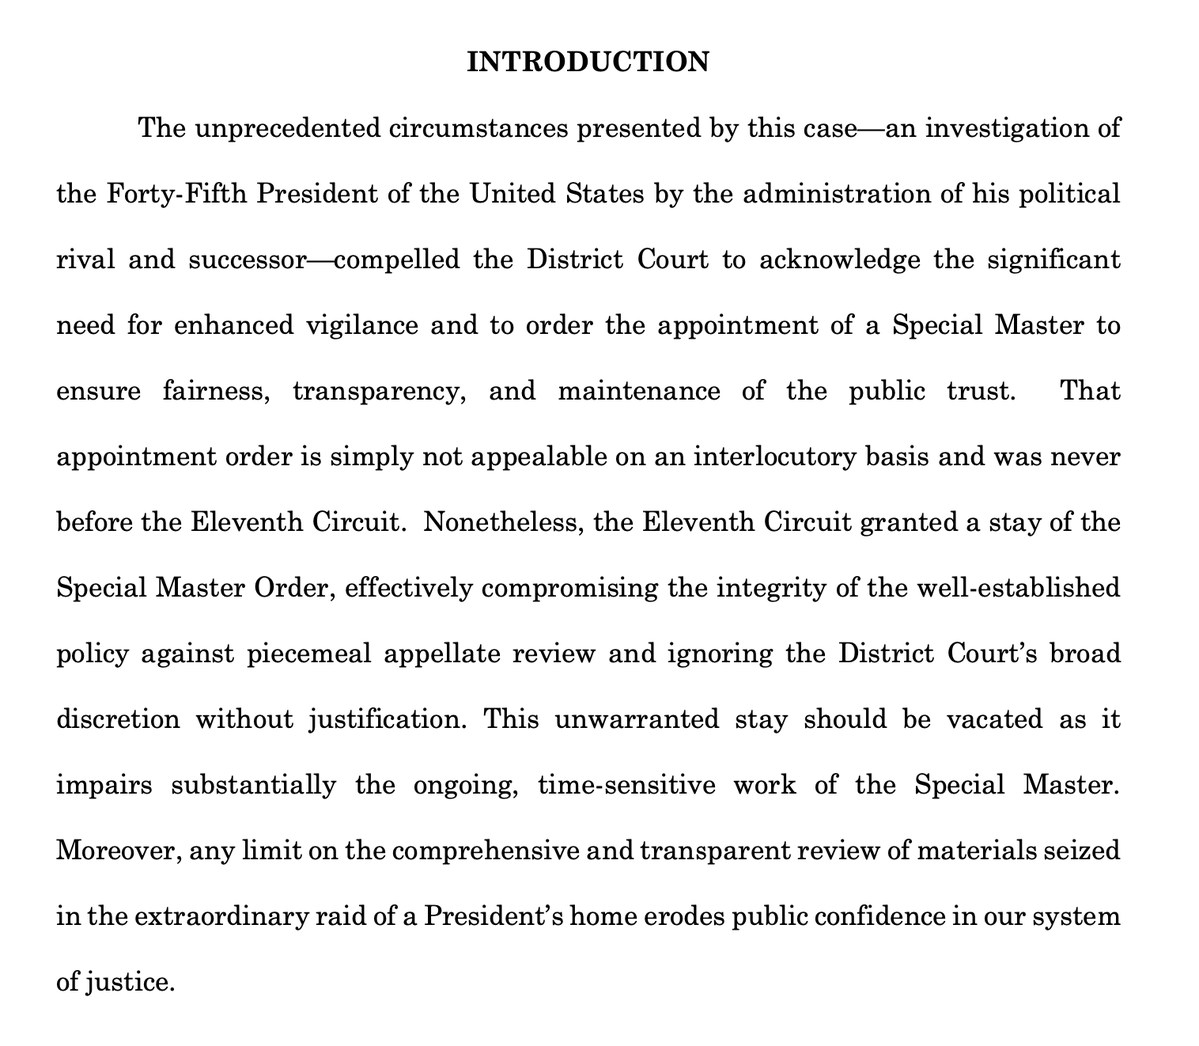 Donald Trump's lawyers have filed an emergency request asking the Supreme Court to intervene in the case over classified documents at Mar-a-Lago. Trump wants SCOTUS to vacate a Sept. 21 ruling by the 11th Circuit